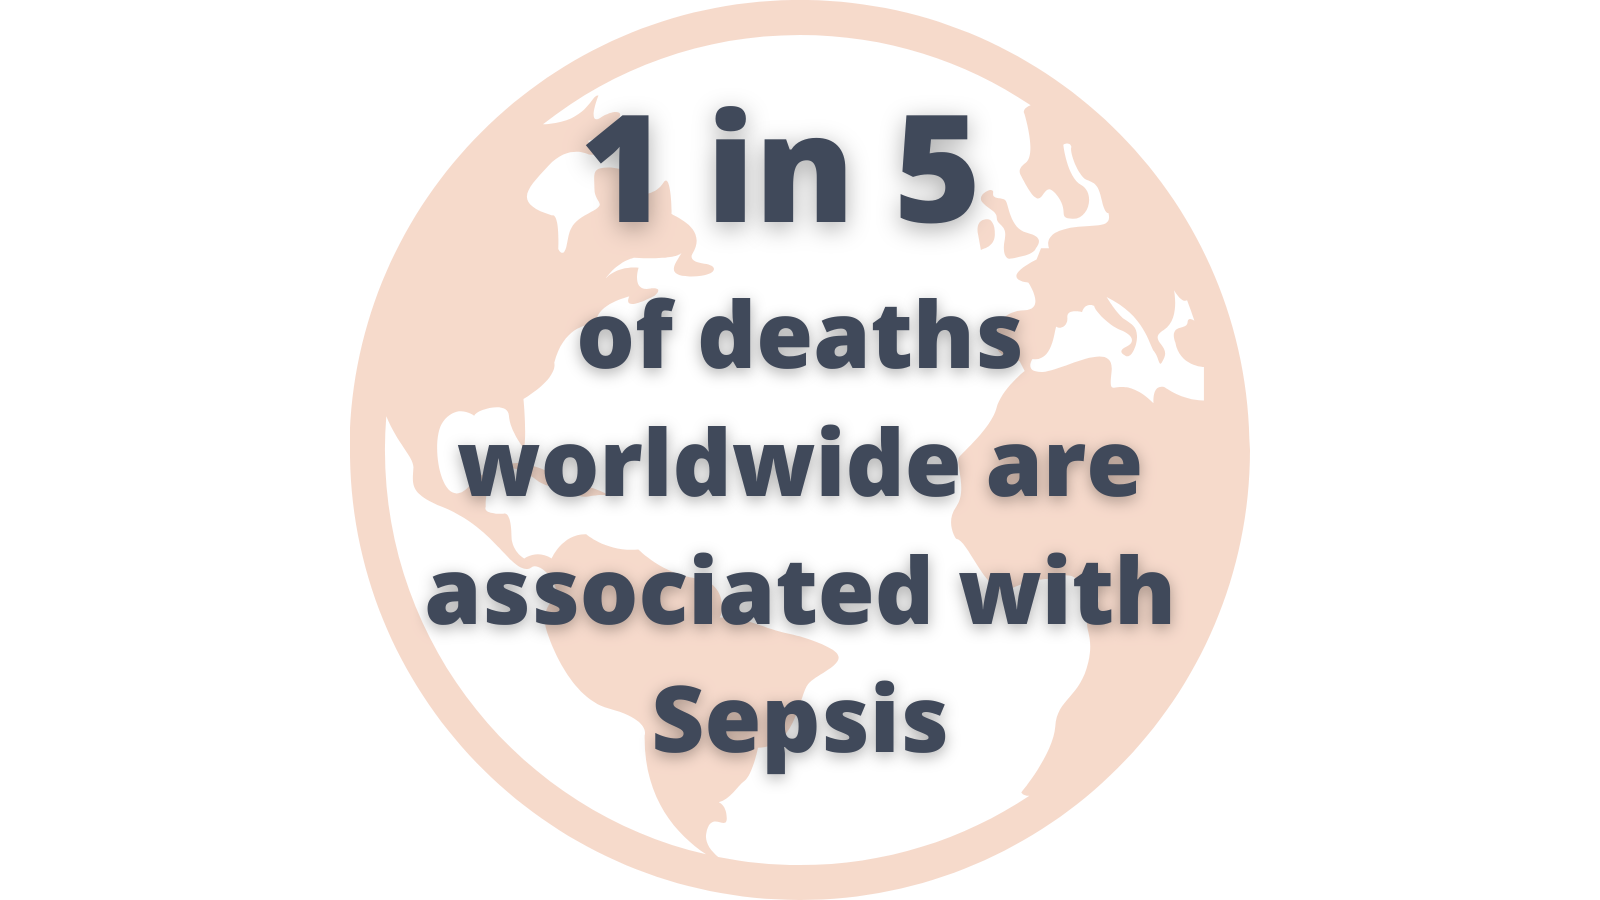 1 in 5 of deaths worldwide are associated with Sepsis